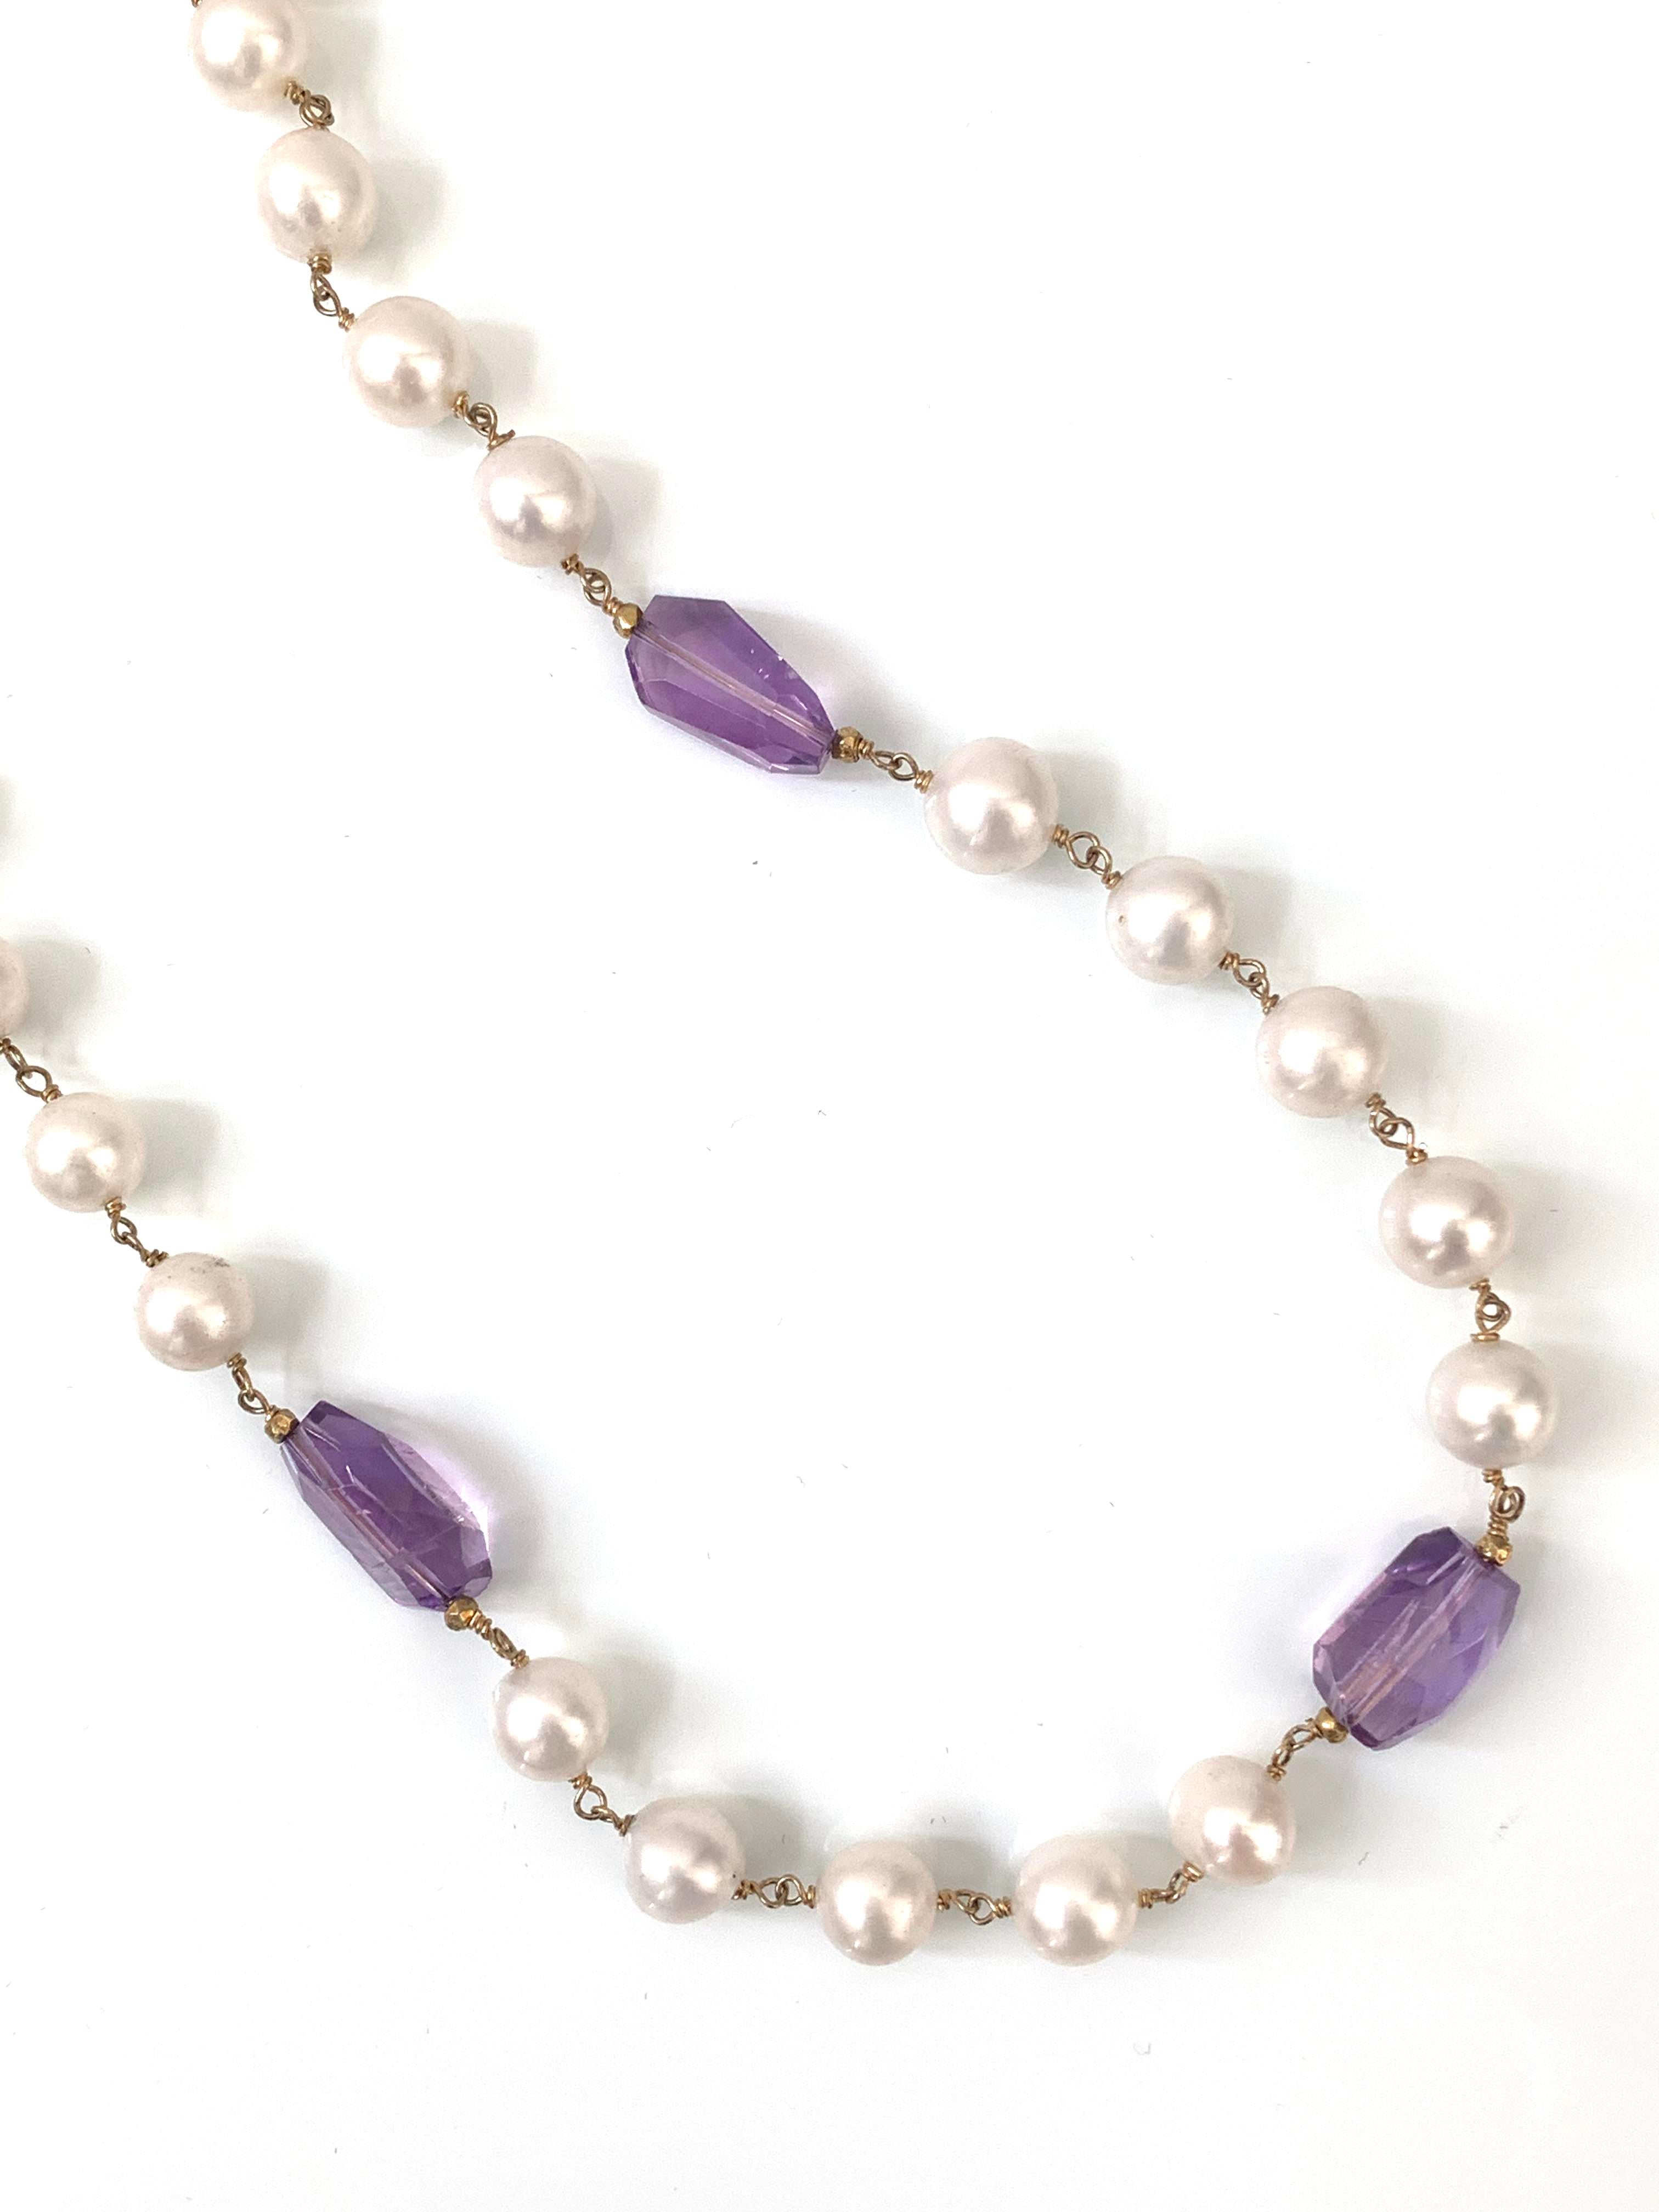 Contemporary 18k gold-filled Genuine Faceted Amethyst and Cultured Pearl Necklace 43